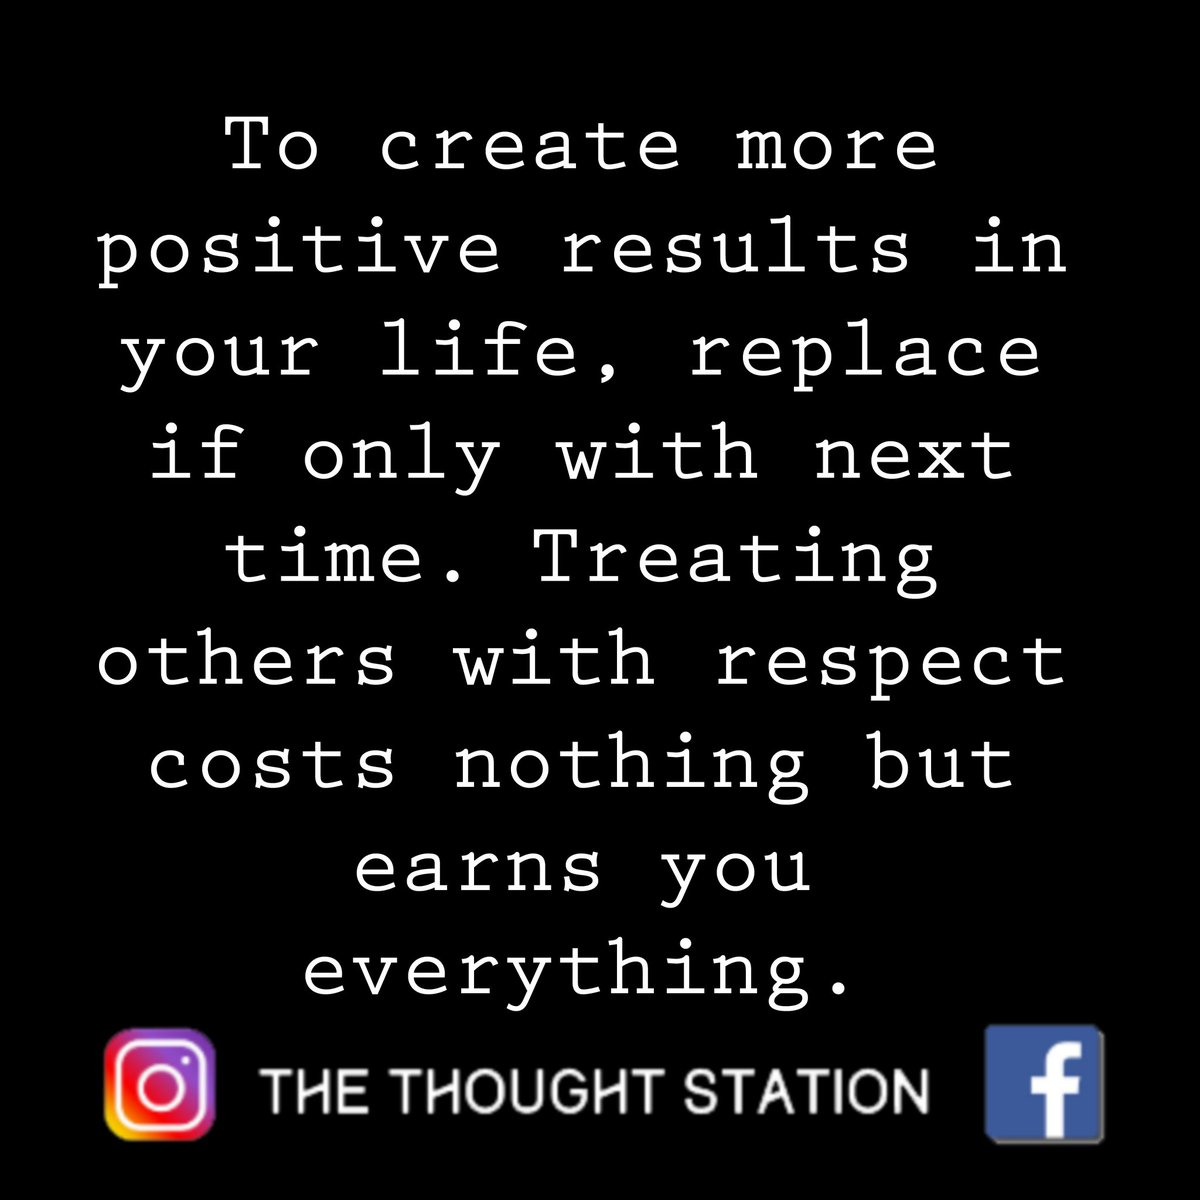 #thoughts #positivethoughts #thoughtsoftheday #thoughtsbecomethings #thoughtsforlife #quotes #quotesaboutlife #quotestoliveby #quotestagram #quotesoftheday #quotestags #quotesdaily #successquotes #successmindset #successtips #successquote #successtip #successminded #successcoach